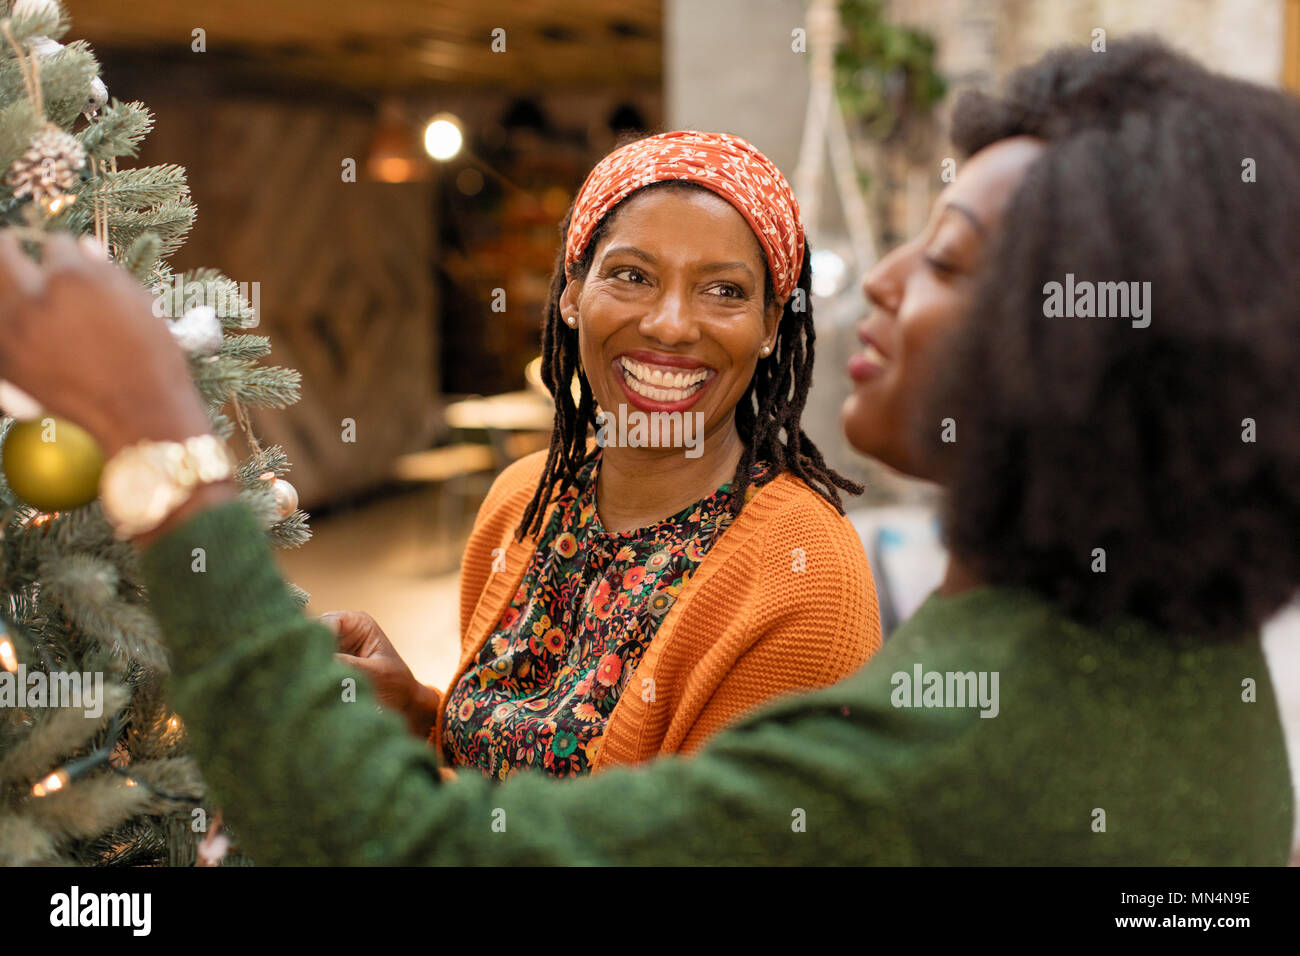 Smiling mother and daughter decorating Christmas tree Stock Photo